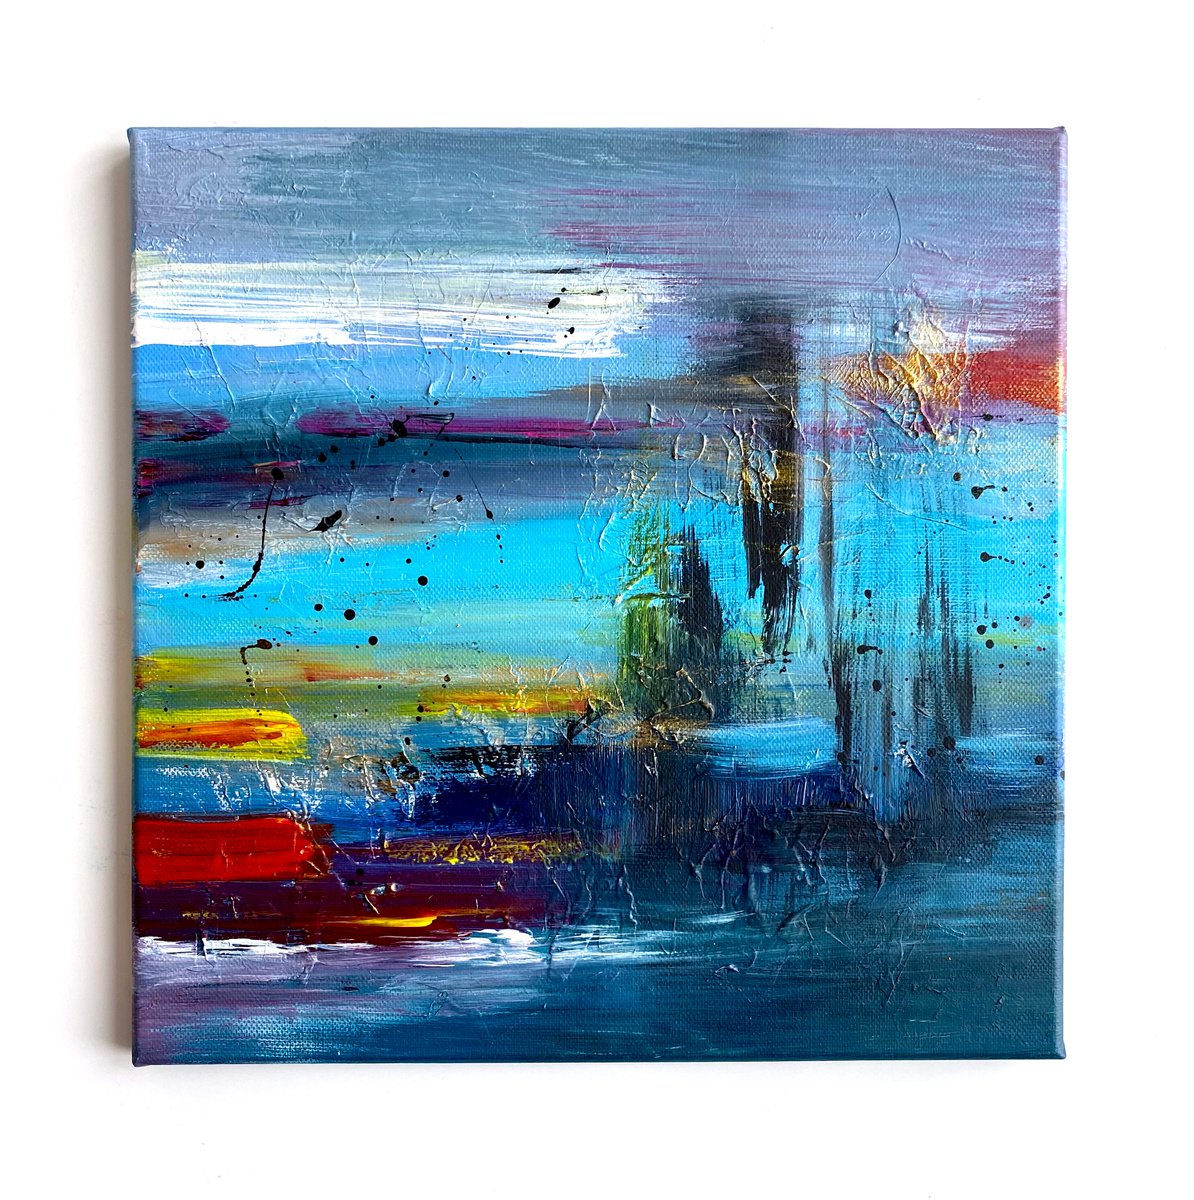 Blue absrtaction 2, abstract acrylic painting on canvas art for modern interior contempora... by Irina Povaliaeva